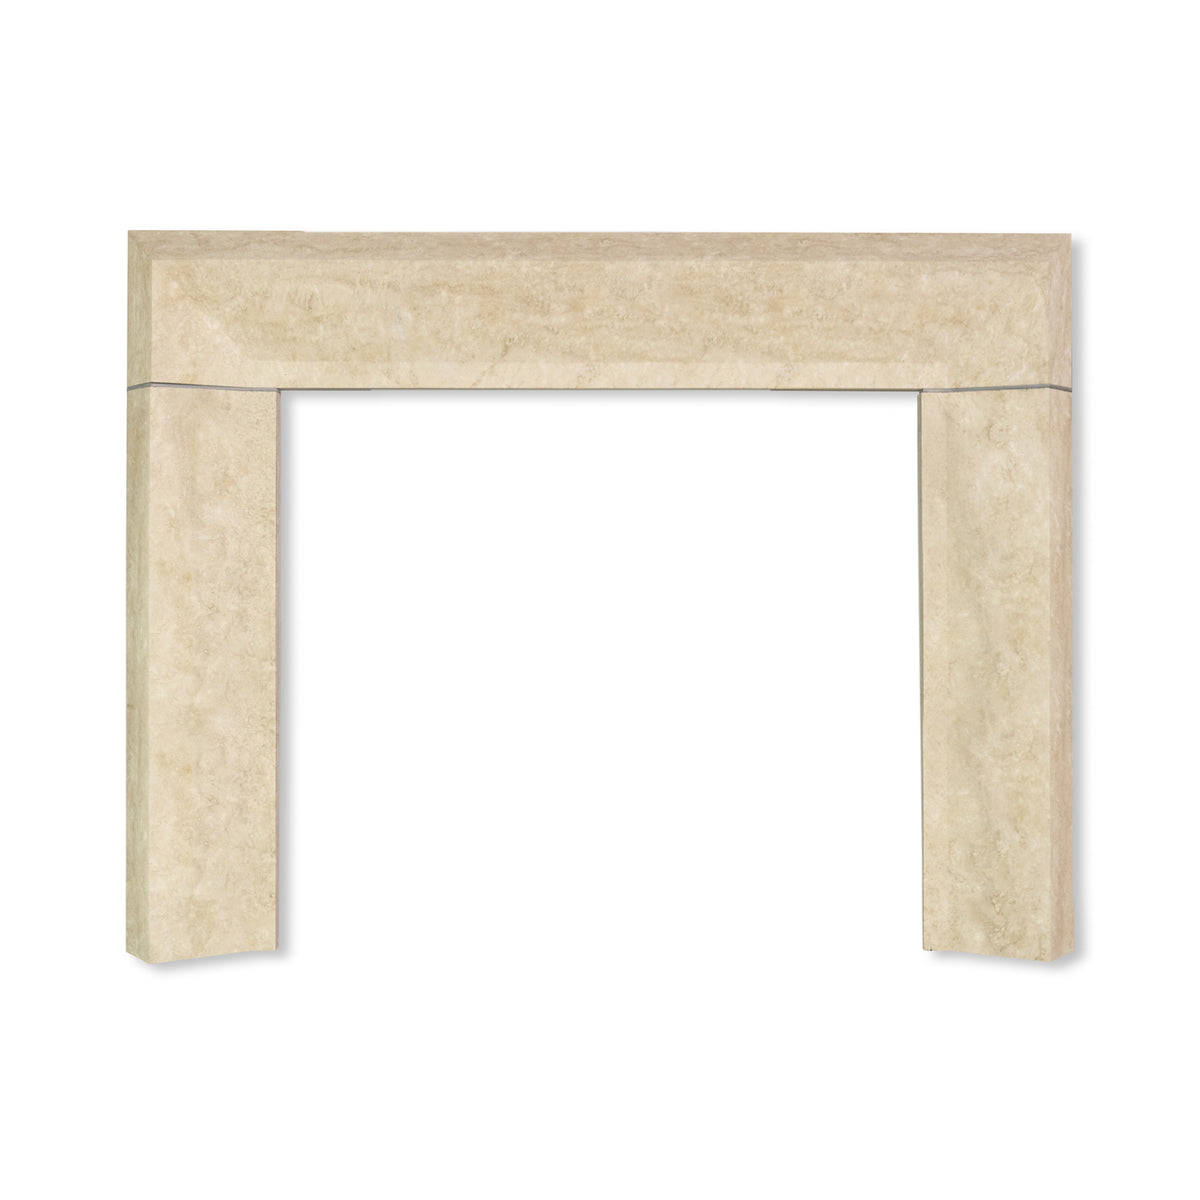 Meridian Fireplace in Latte Travertine with Honed Finish Main Product Slider View